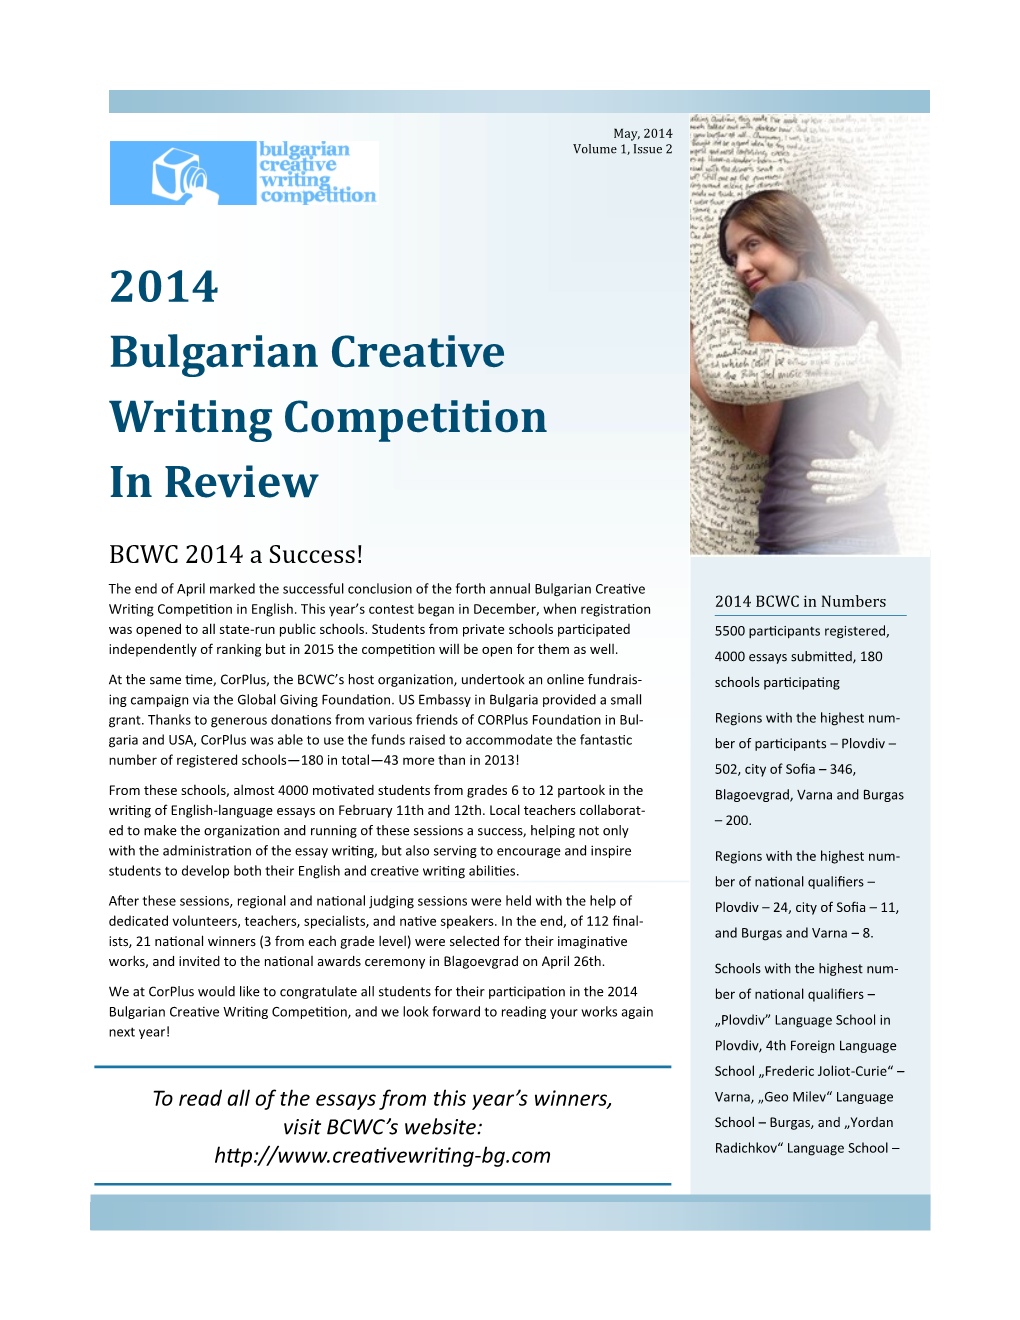 2014 Bulgarian Creative Writing Competition in Review